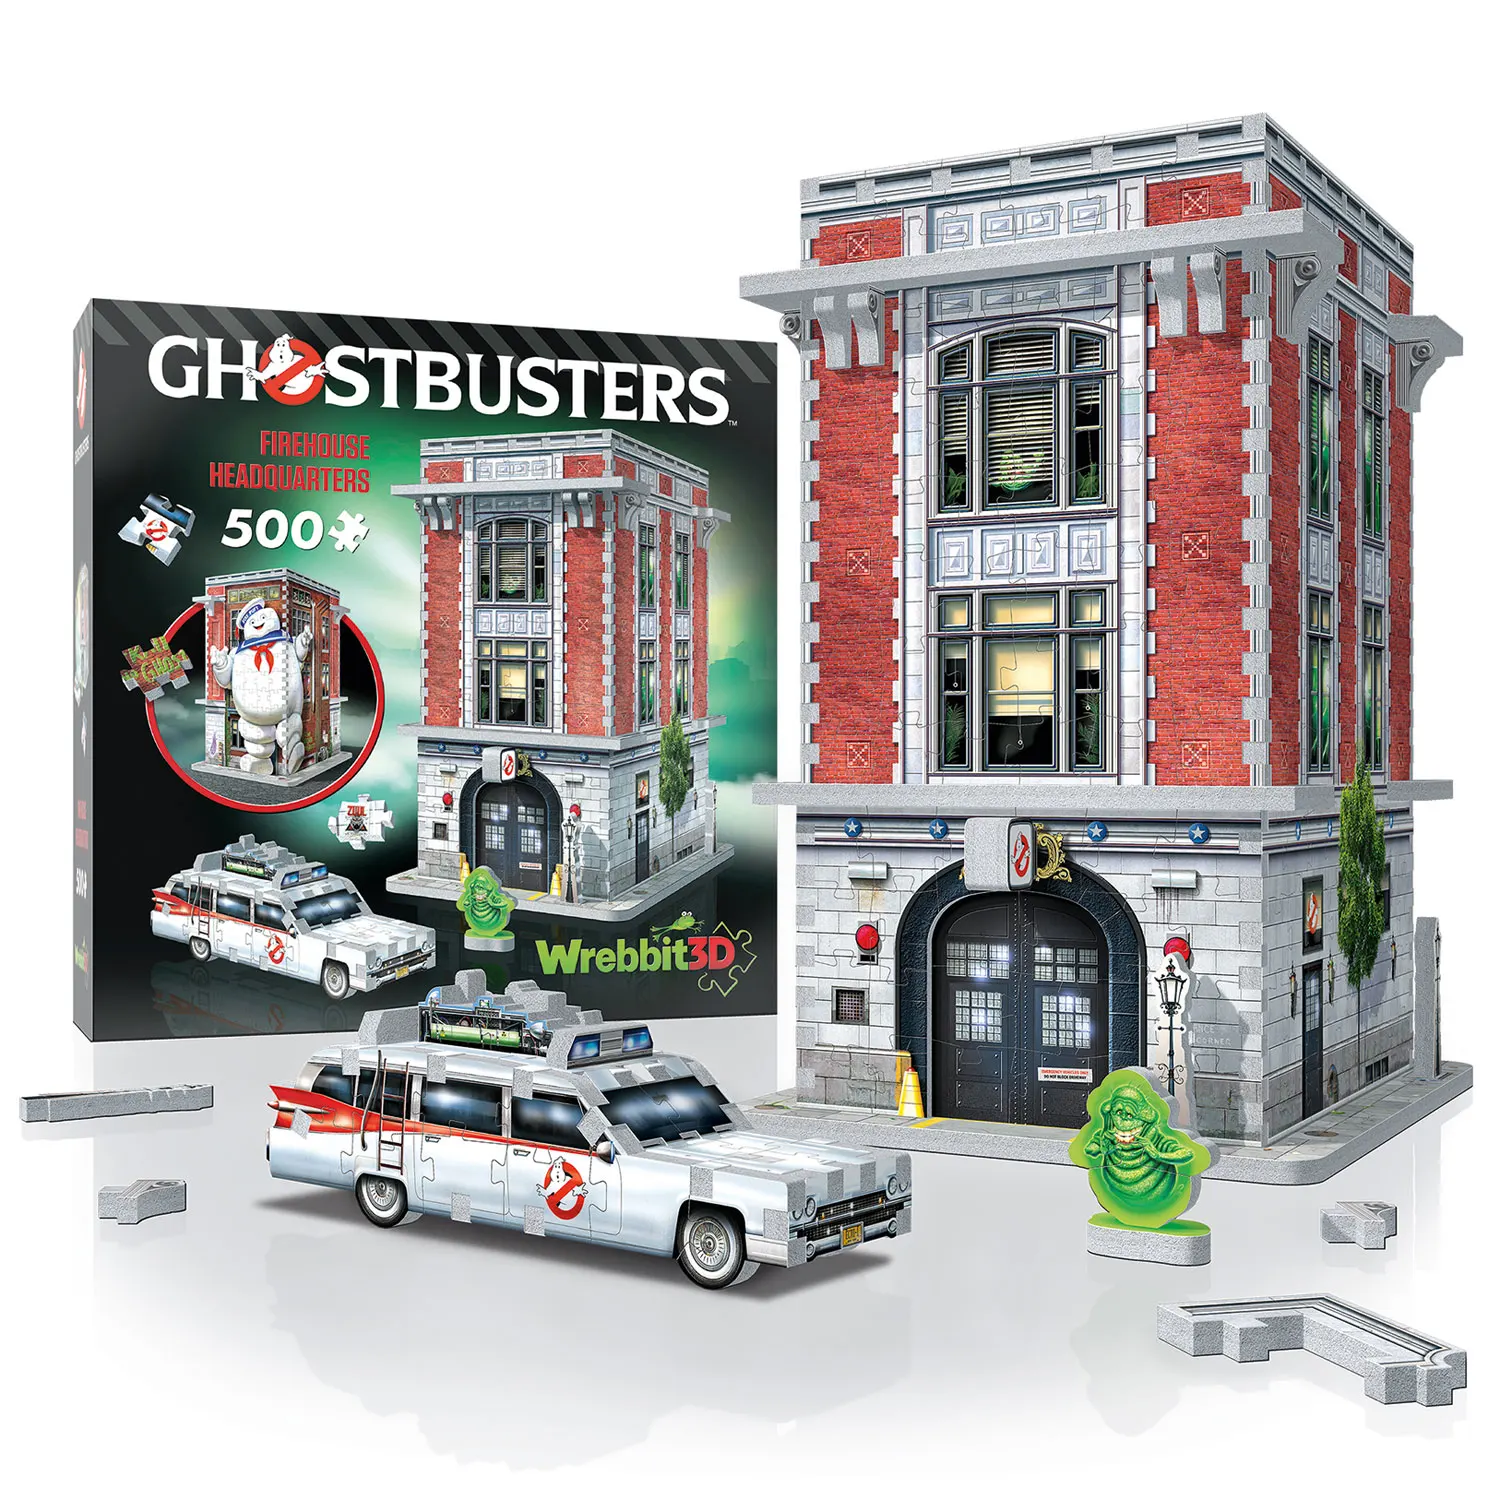  GHOSTBUSTER FireHouse HQ (500Teile) - 3D-Puzzle